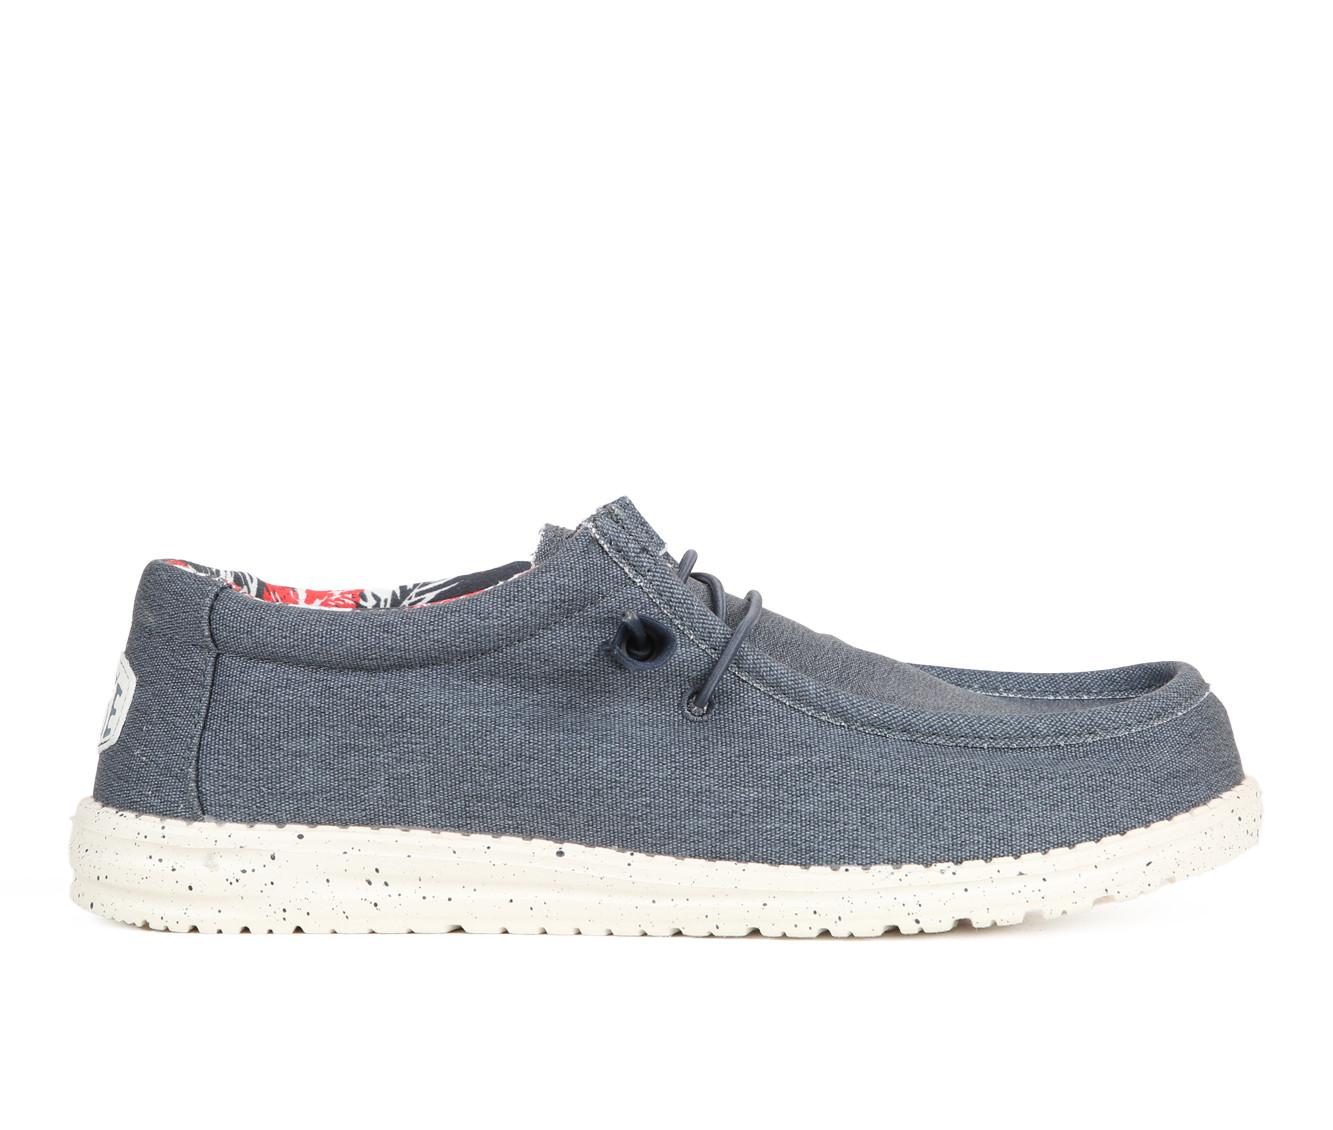 Men's HEYDUDE Wally Stretch Canvas Casual Shoes